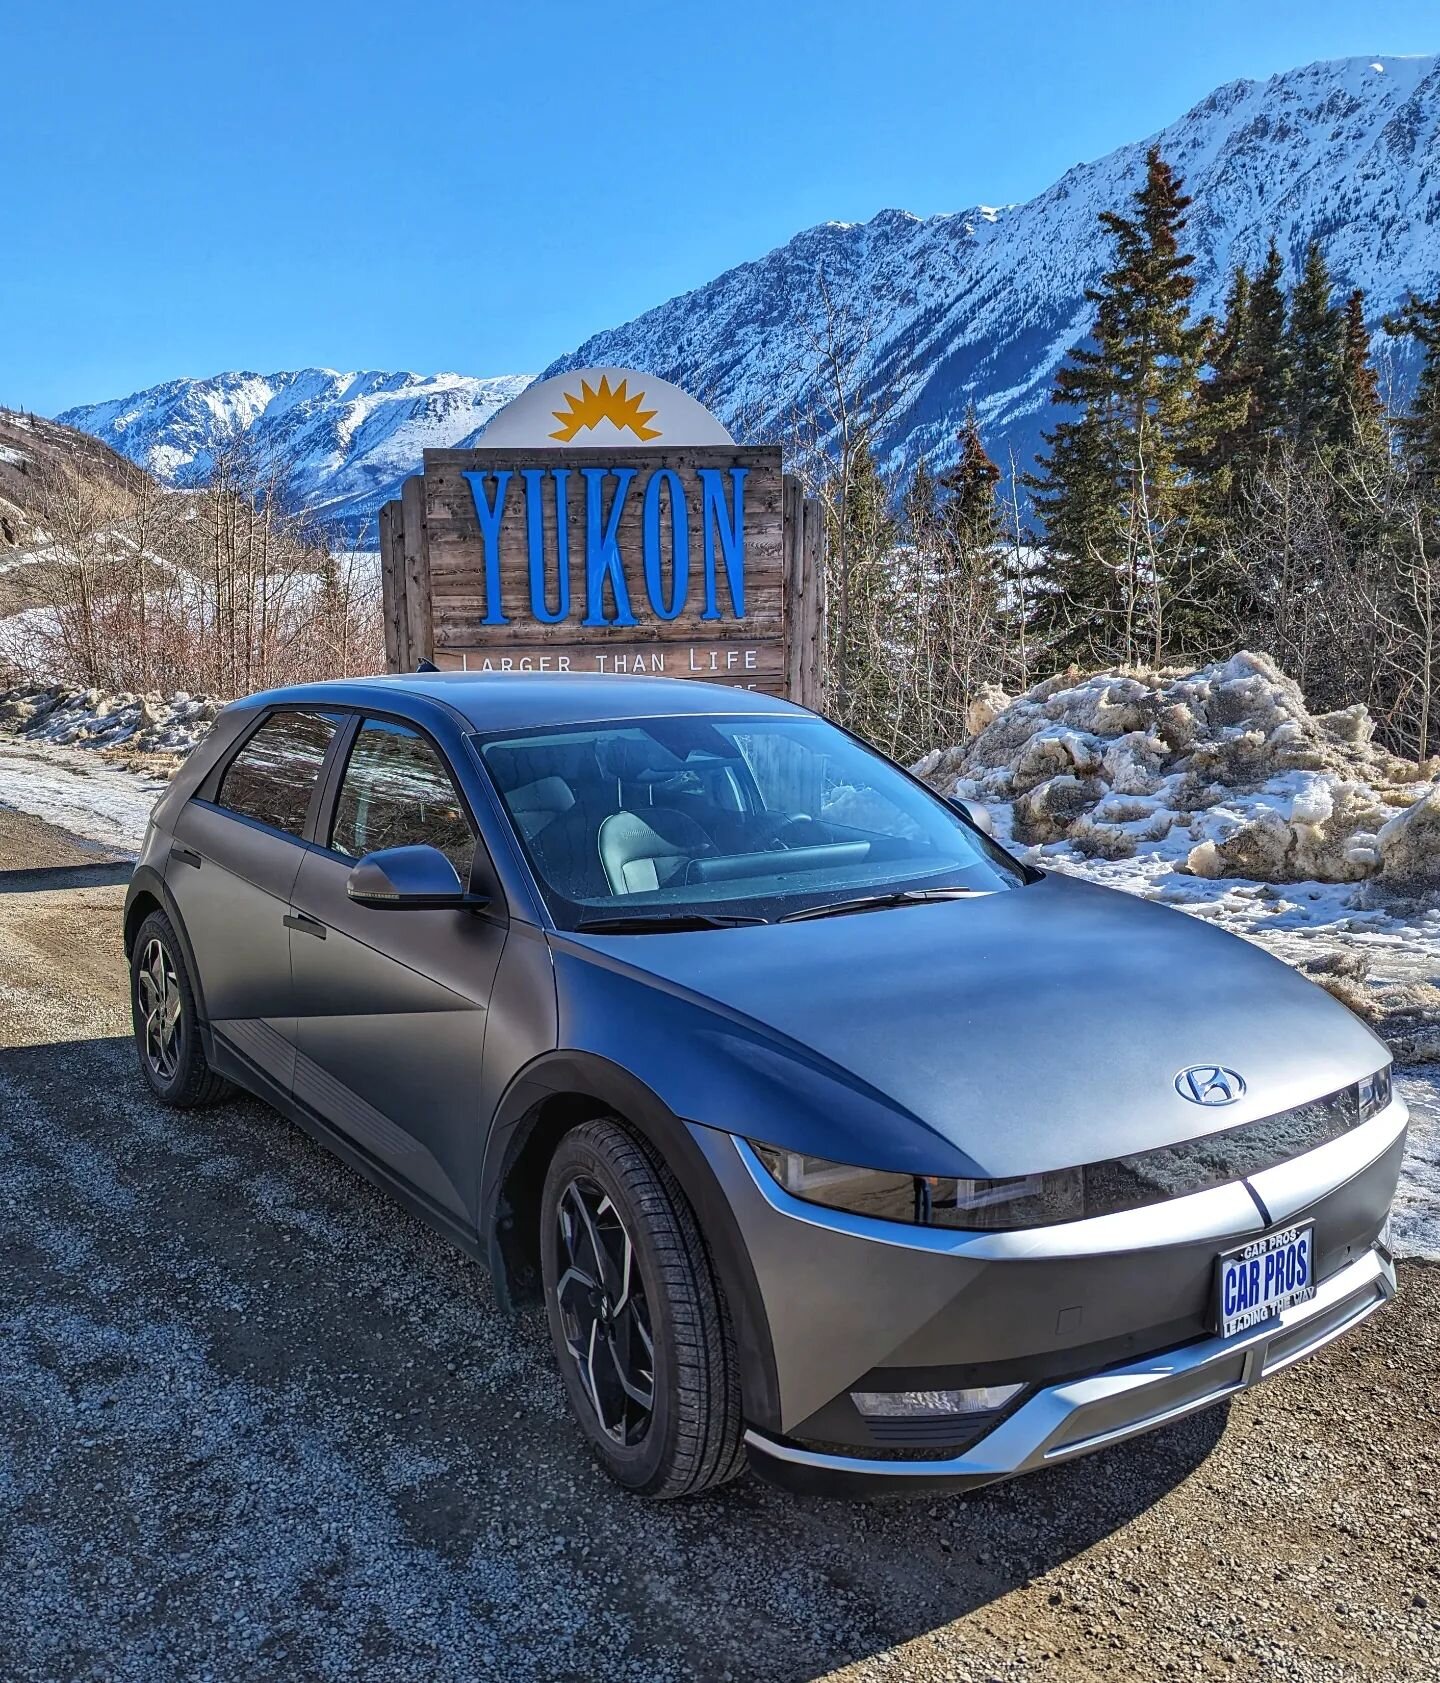 The newest member of our fleet took its maiden voyage to the Yukon yesterday!

This drive was epic in the new Ioniq 5 ALL electric vehicle!

The weather was perfect...and the views were spectacular as always!

Because of its spaceship-like look and t